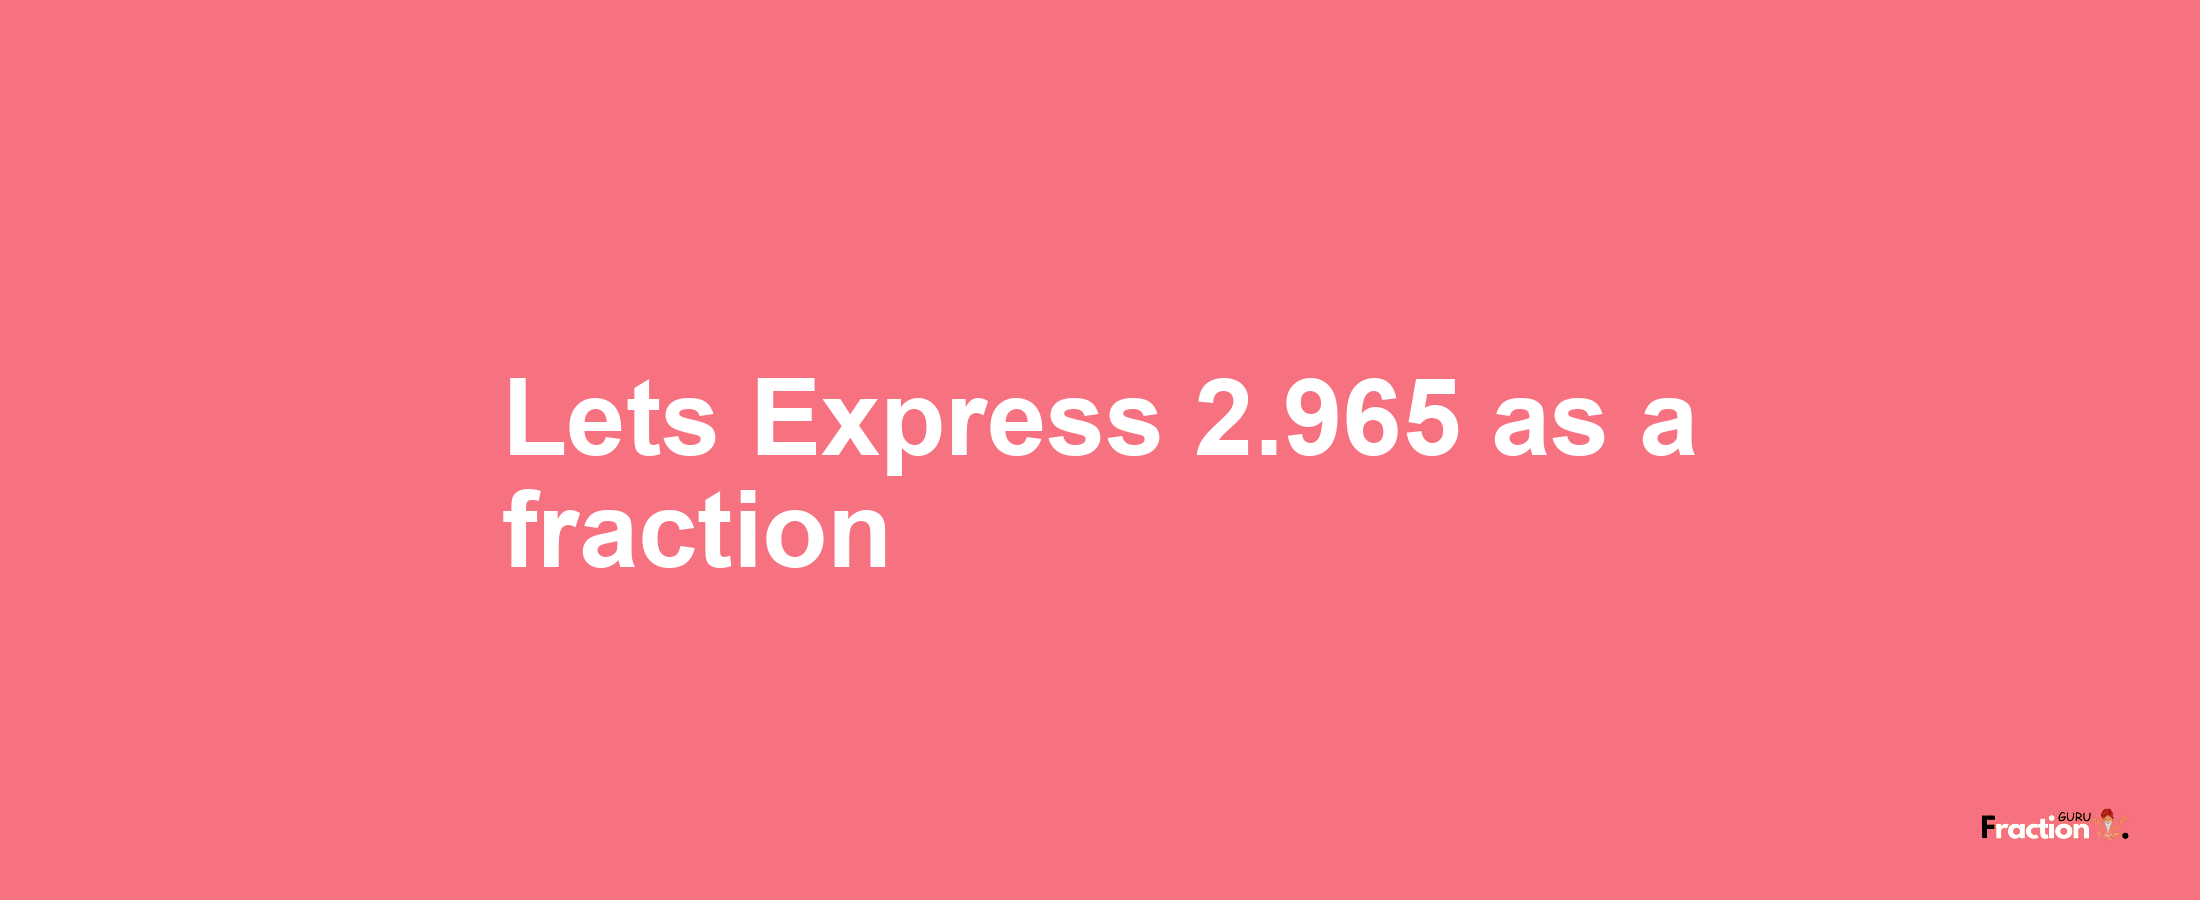 Lets Express 2.965 as afraction